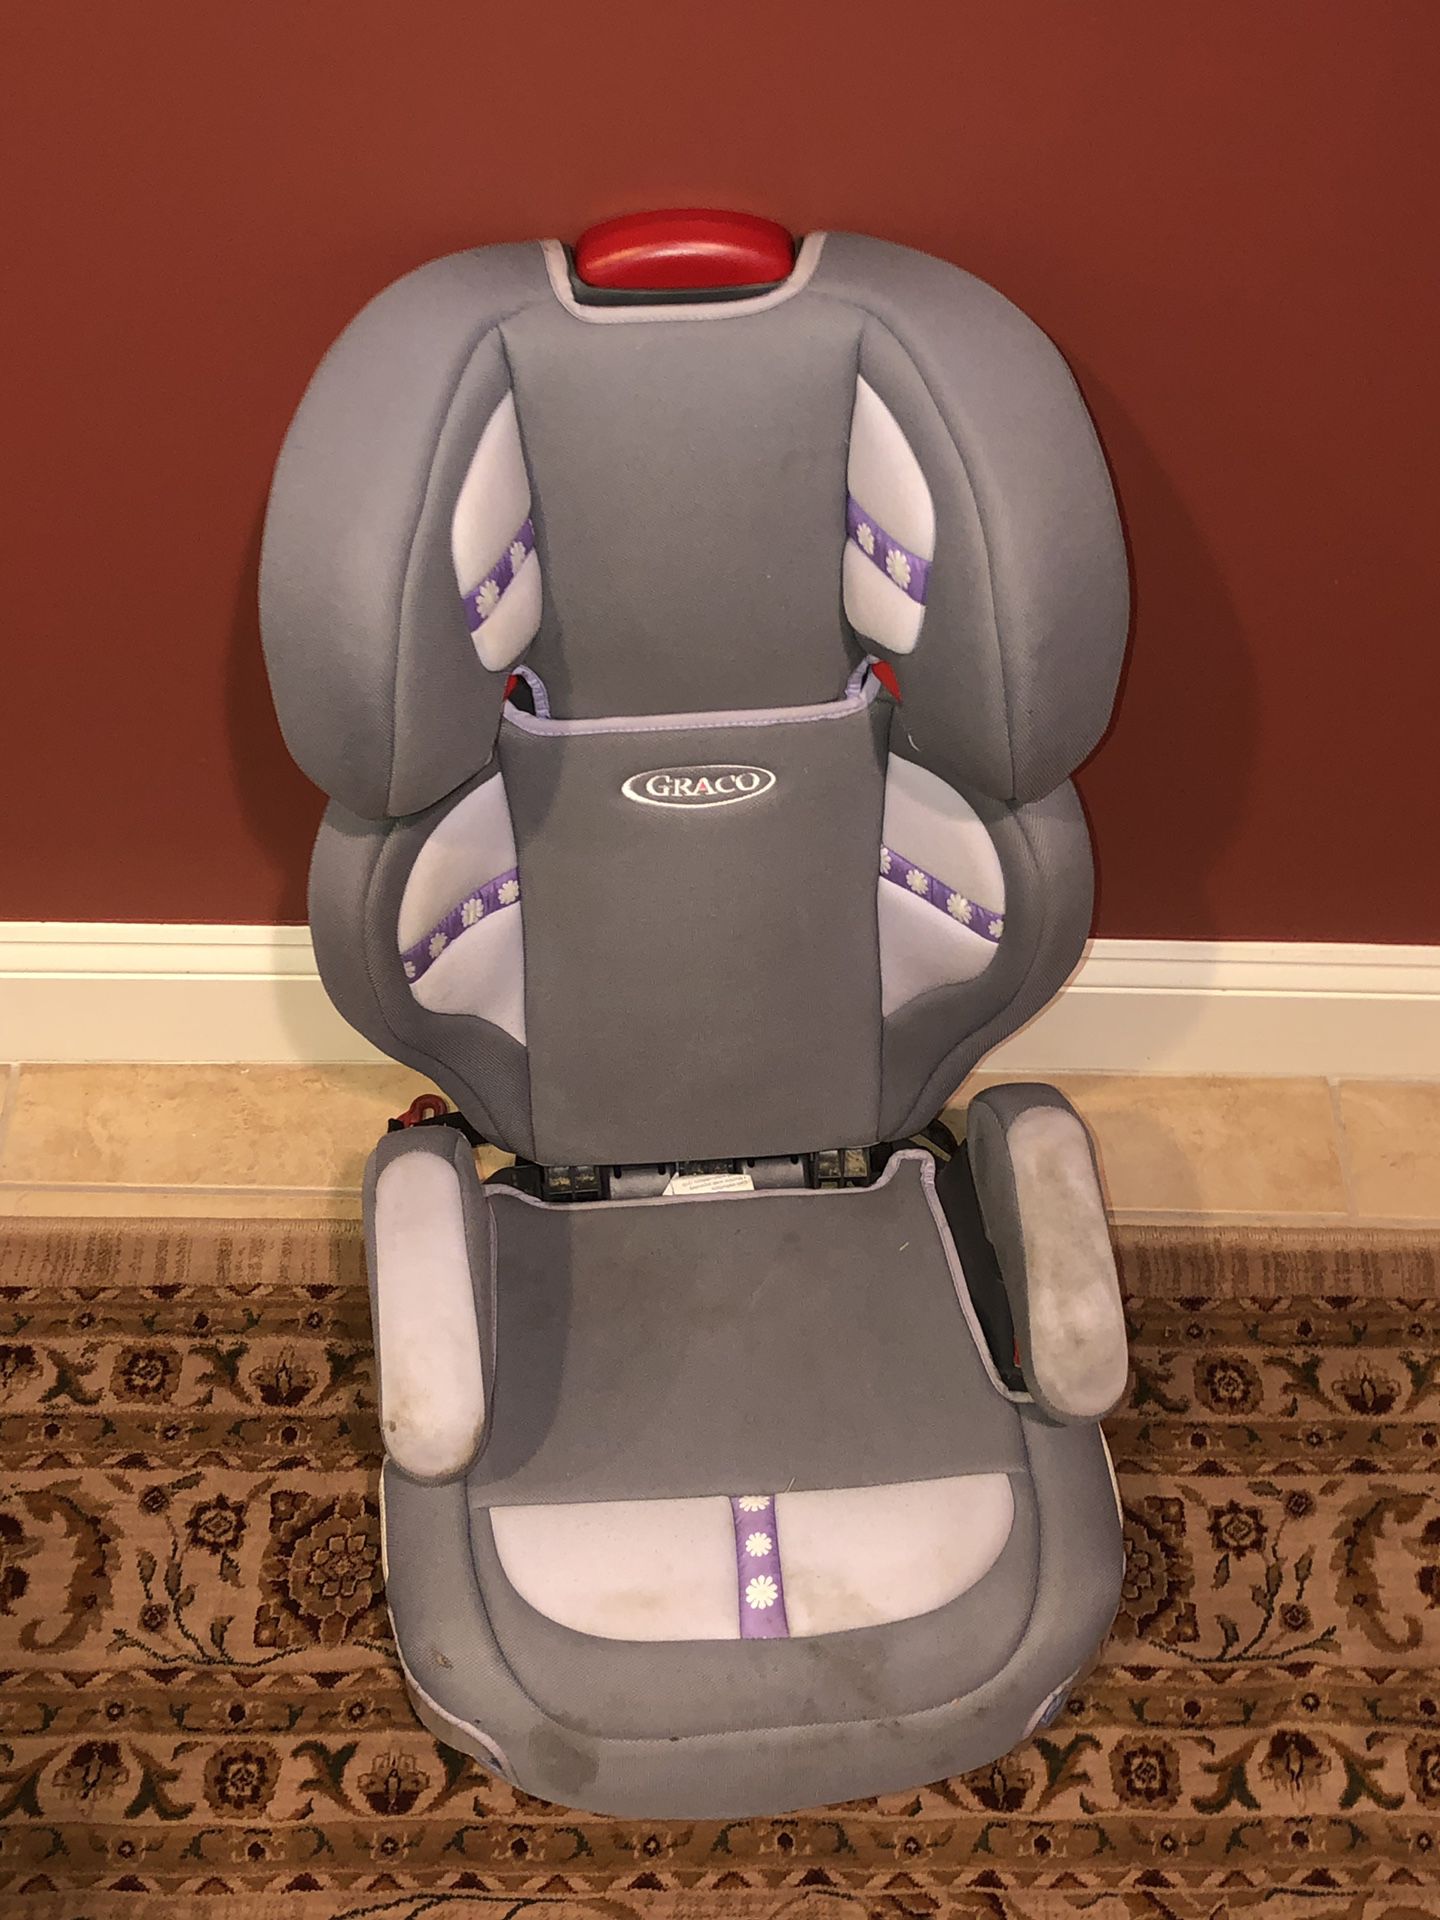 Toddler Car Seat & Booster Seat for sale!